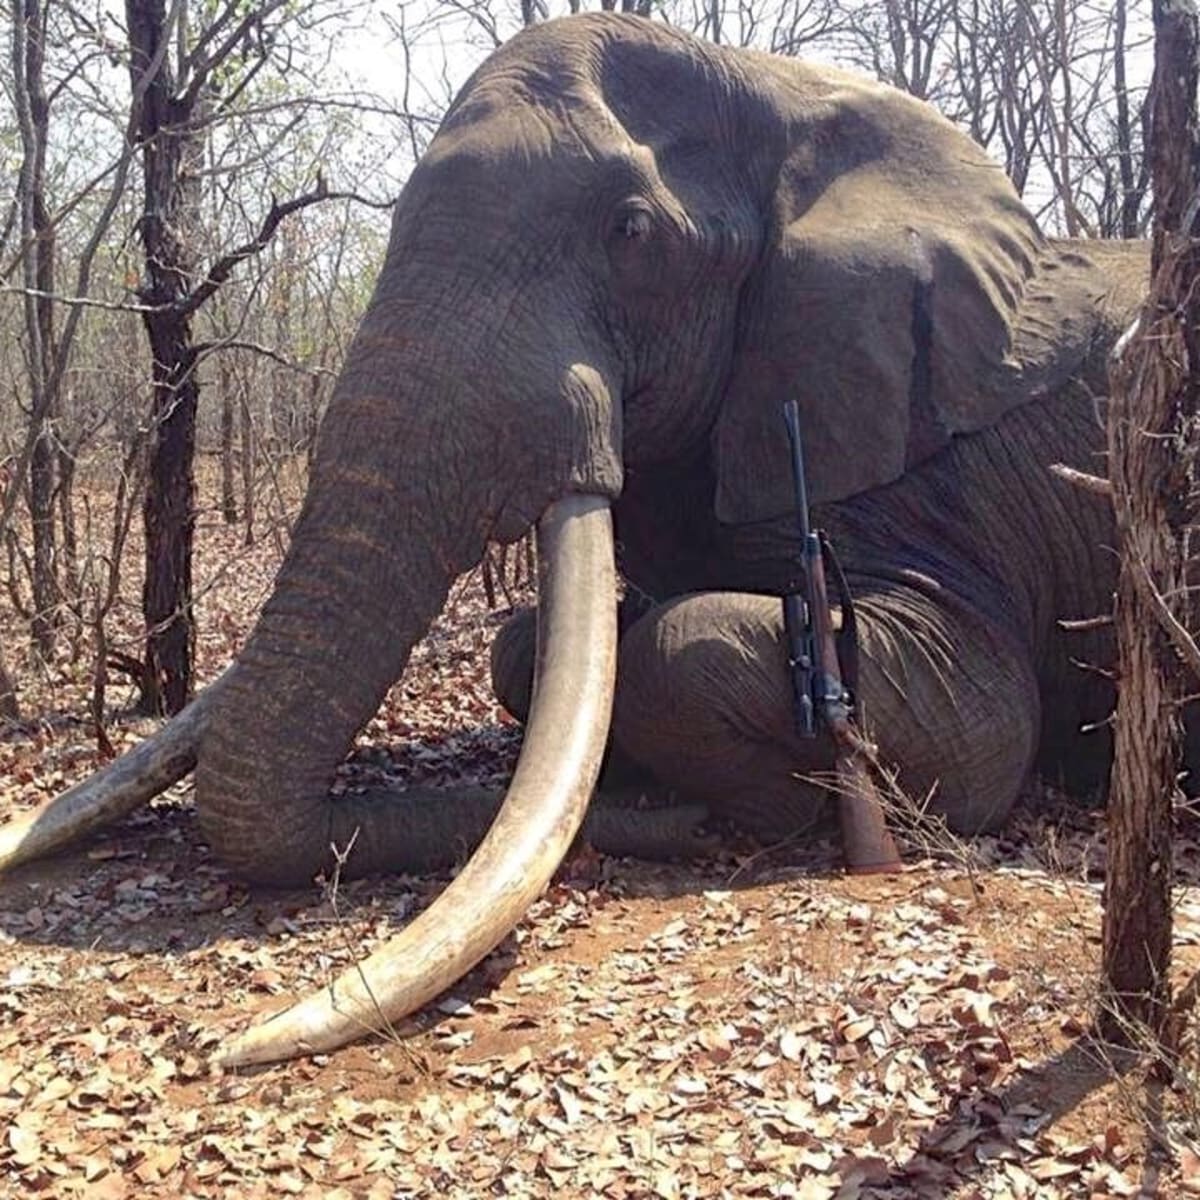 Big tusks on an Elephant indicate well-being & high-quality genes Elephants with big tusks are also the target of trophy hunters, but removing those genes from their populations could lead to a quicker extinction.